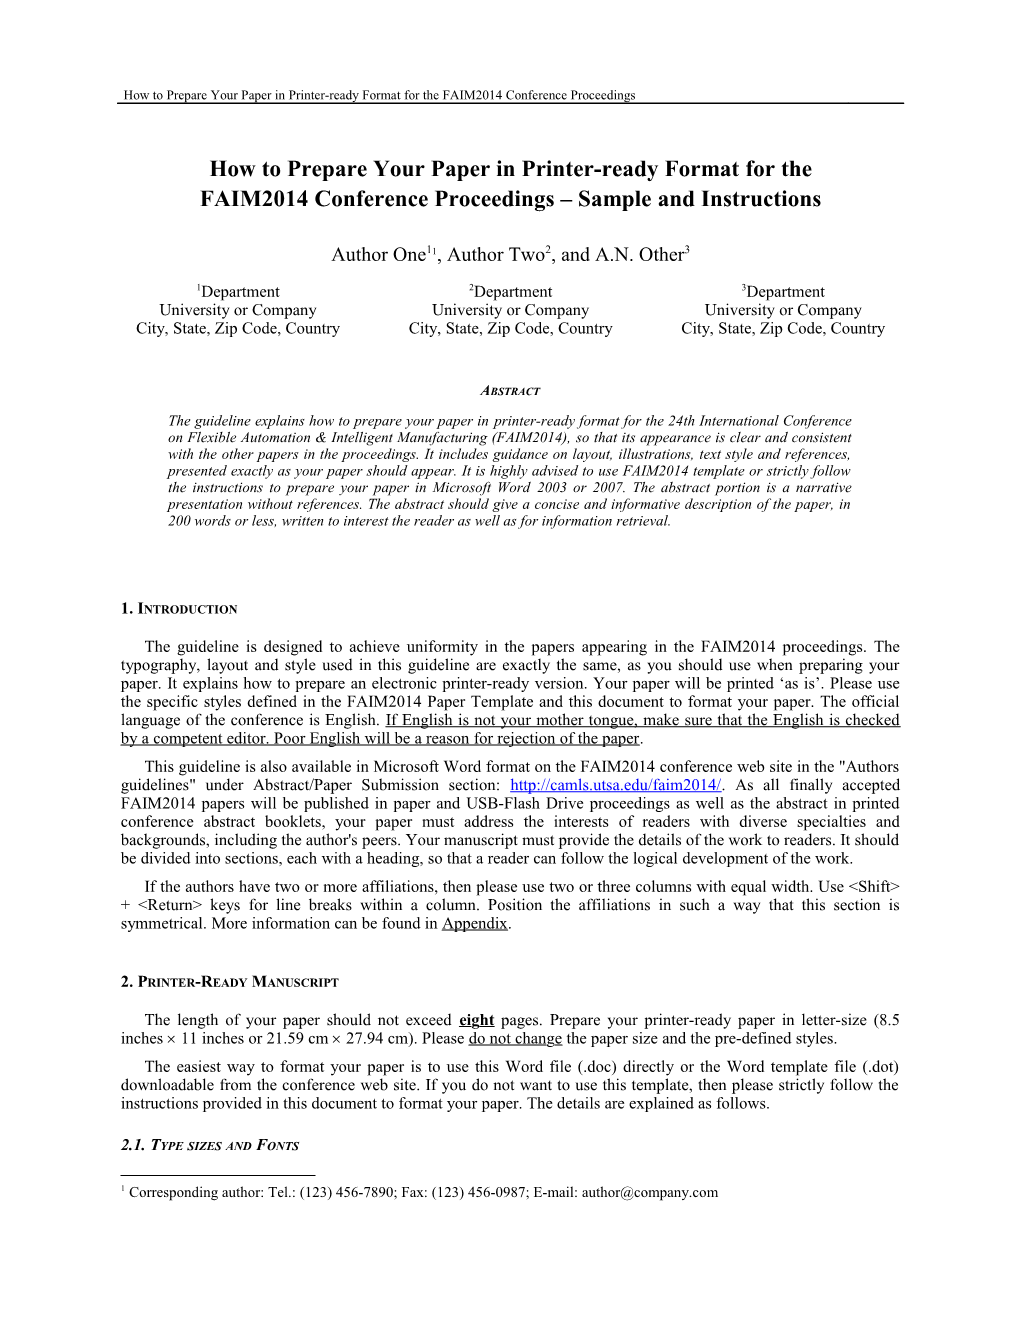 How to Prepare Your Paper in Printer-Ready Format for the FAIM2014 Conference Proceedings